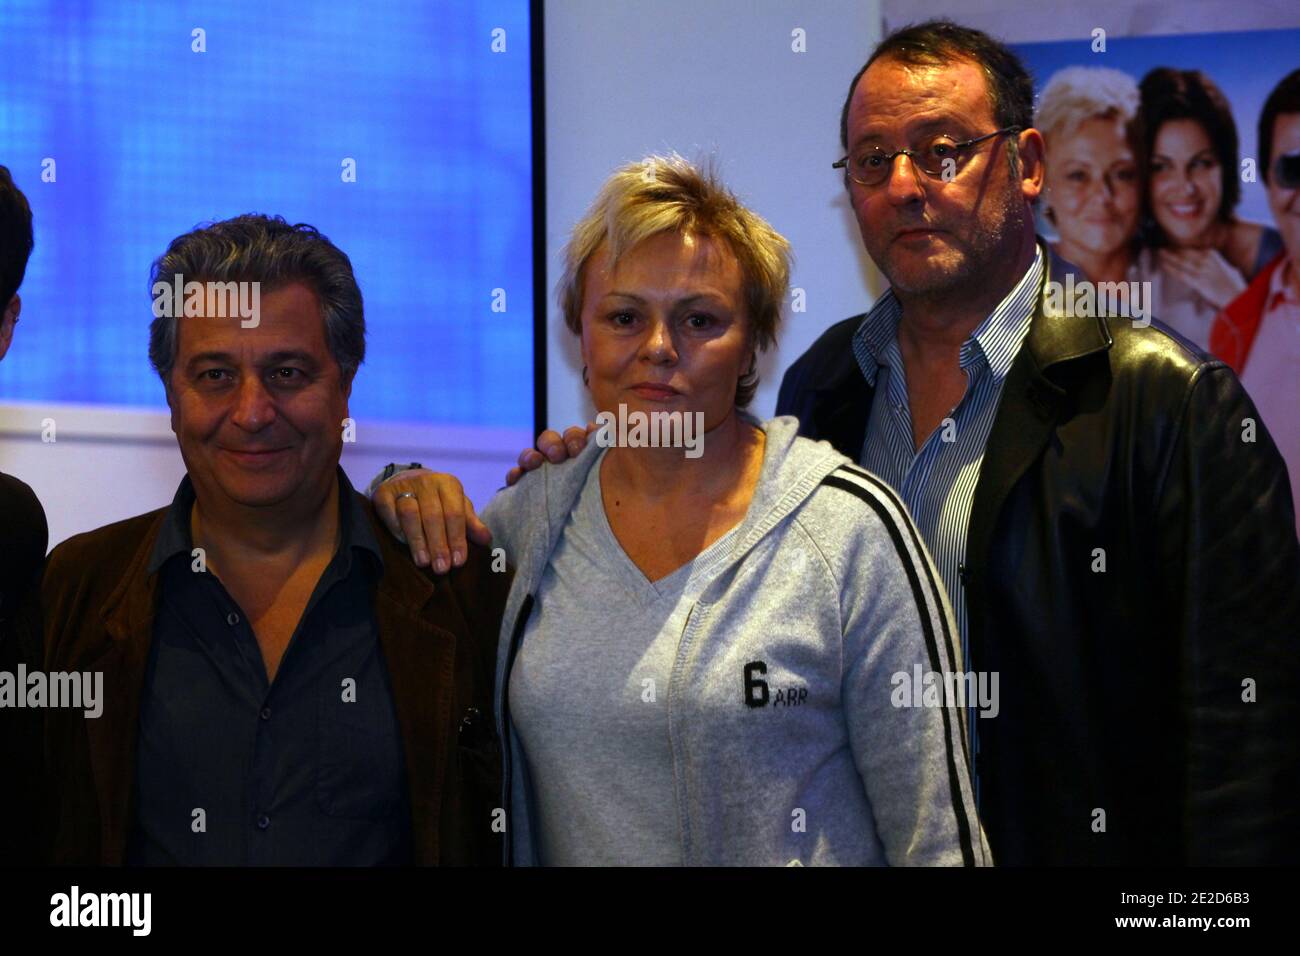 L-R) French director/actor Christian Clavier, actress Muriel Robin and  actor Jean Reno during a press conference prior to the screening of new  movie 'On ne choisit pas sa famille', in Lille, northern